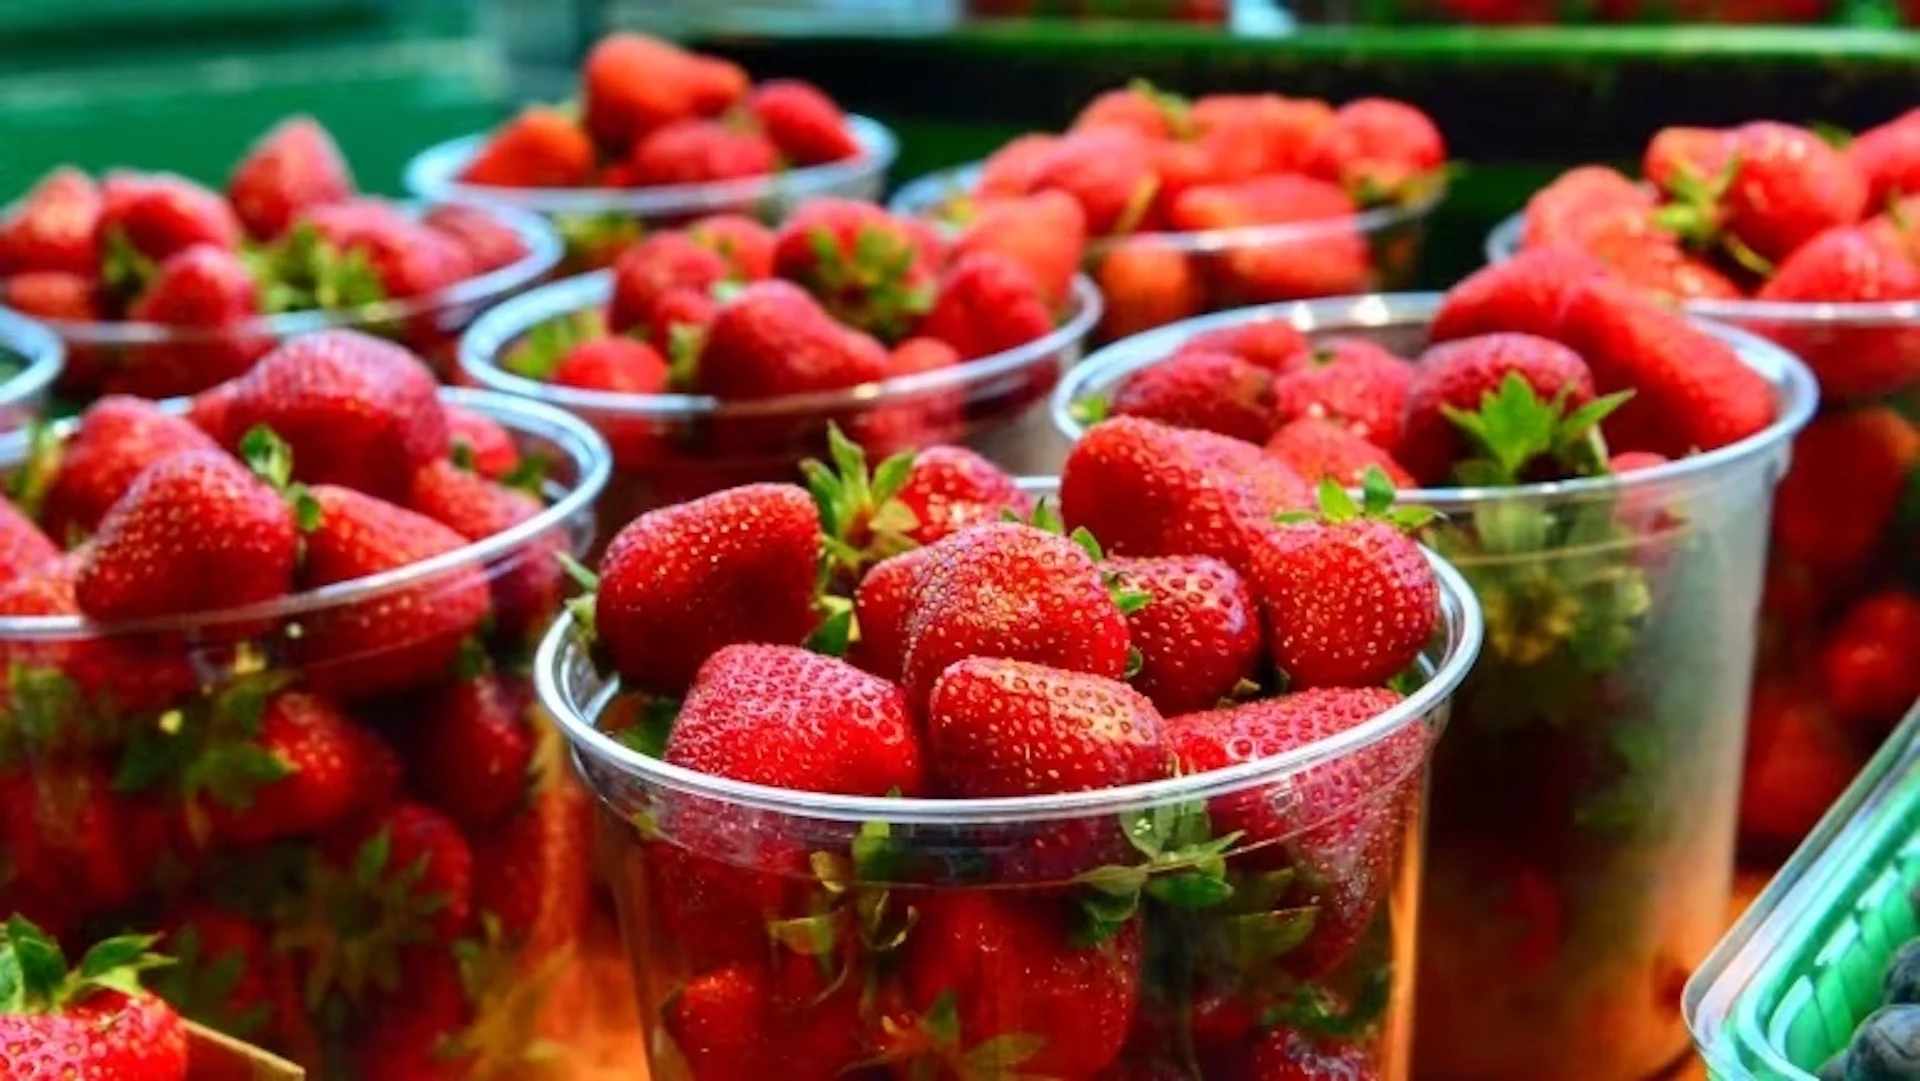 Here's why Ontario's strawberry season seems to be getting longer